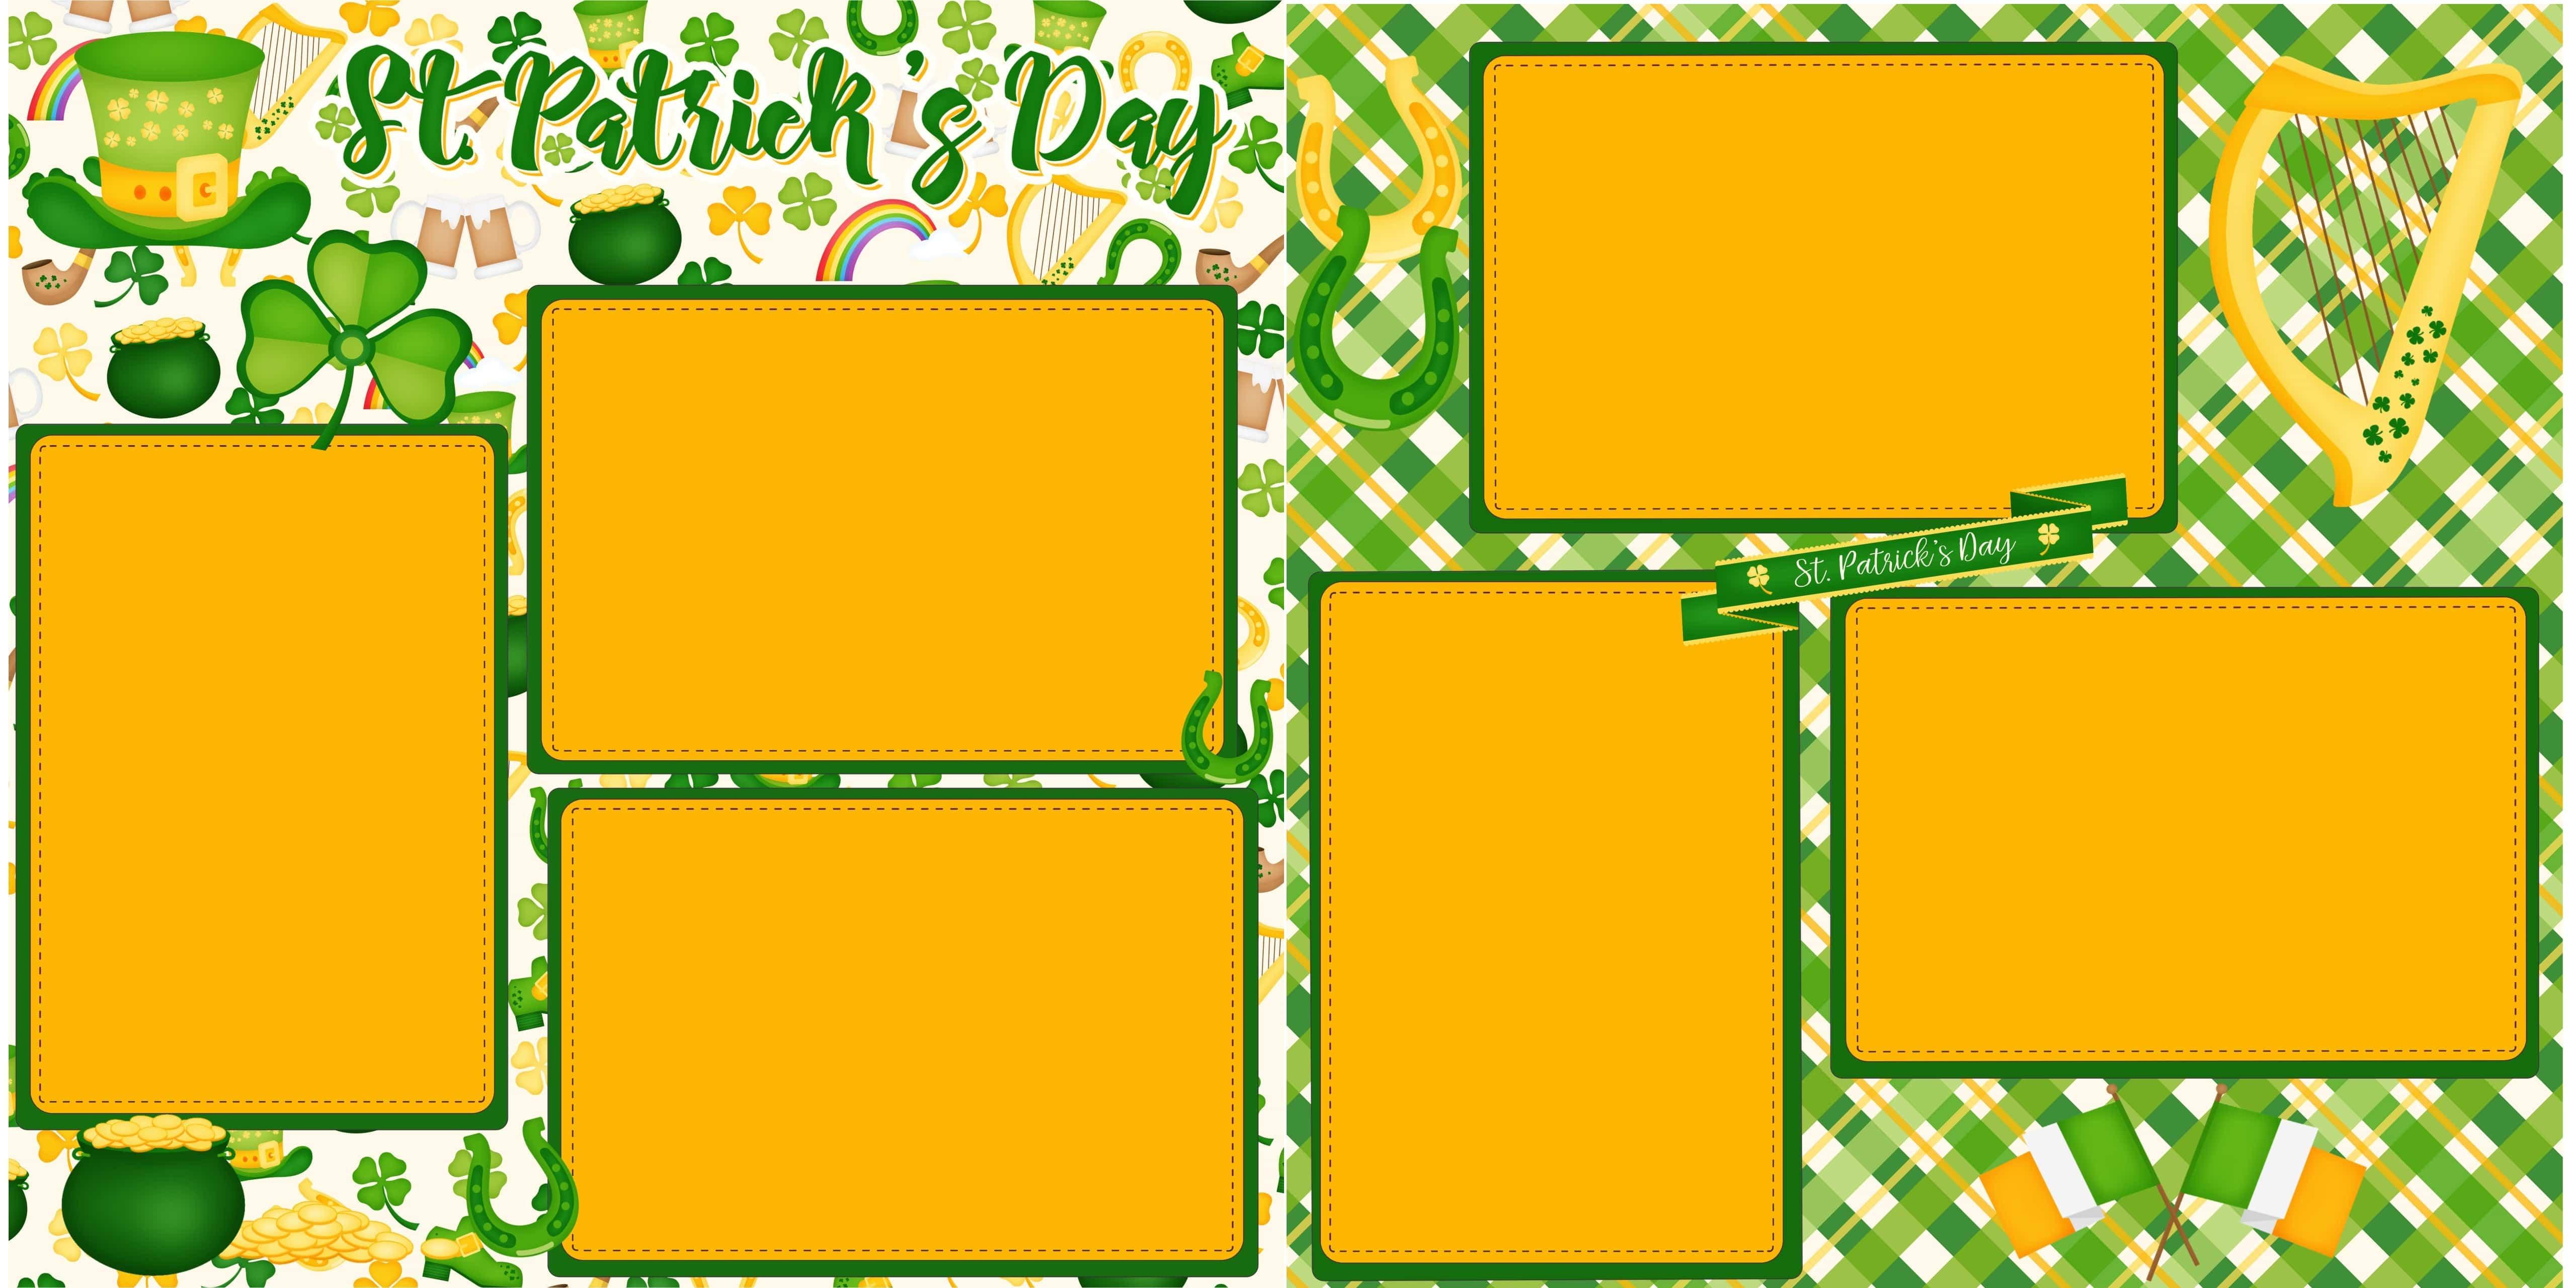 Irish Luck Collection St. Patrick's Day (2) - 12 x 12 Premade, Printed Scrapbook Pages by SSC Designs